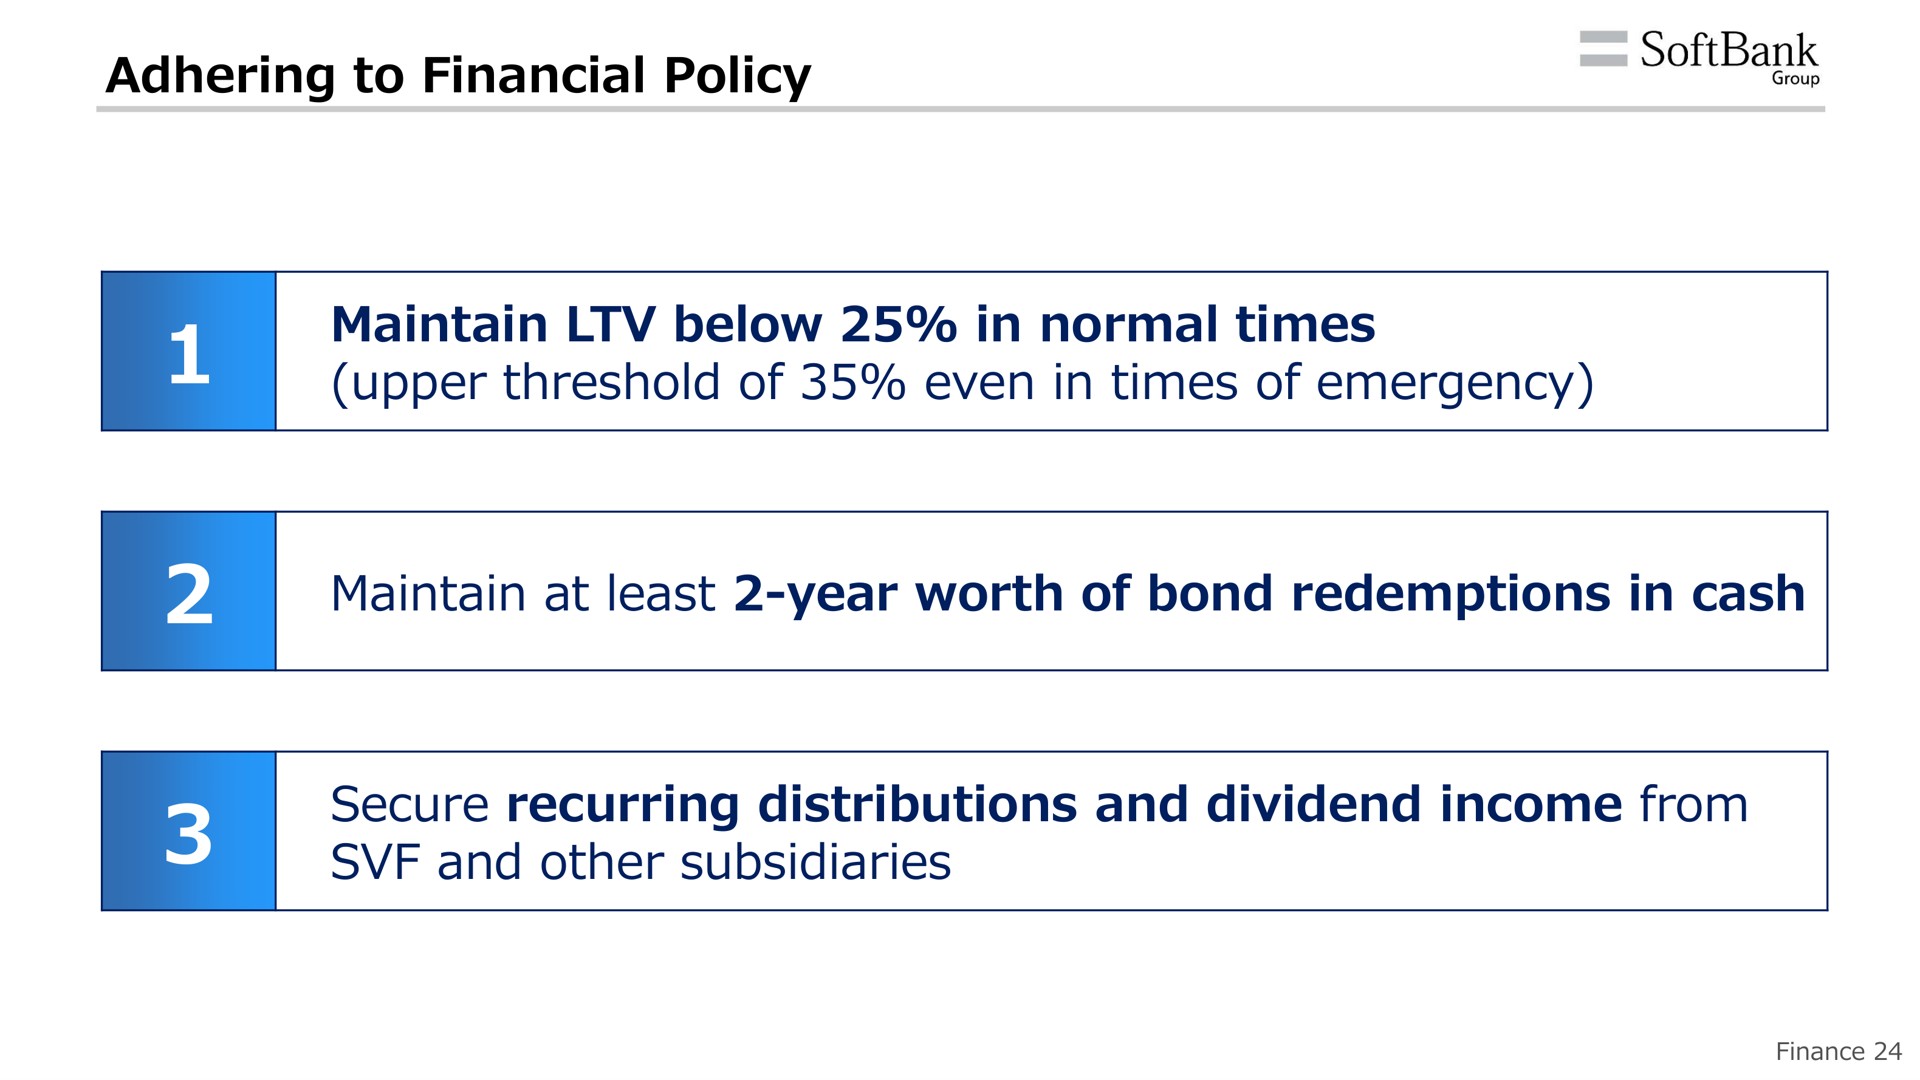 adhering to financial policy maintain below in normal times upper threshold of even in times of emergency maintain at least year worth of bond redemptions in cash secure recurring distributions and dividend income from and other subsidiaries | SoftBank